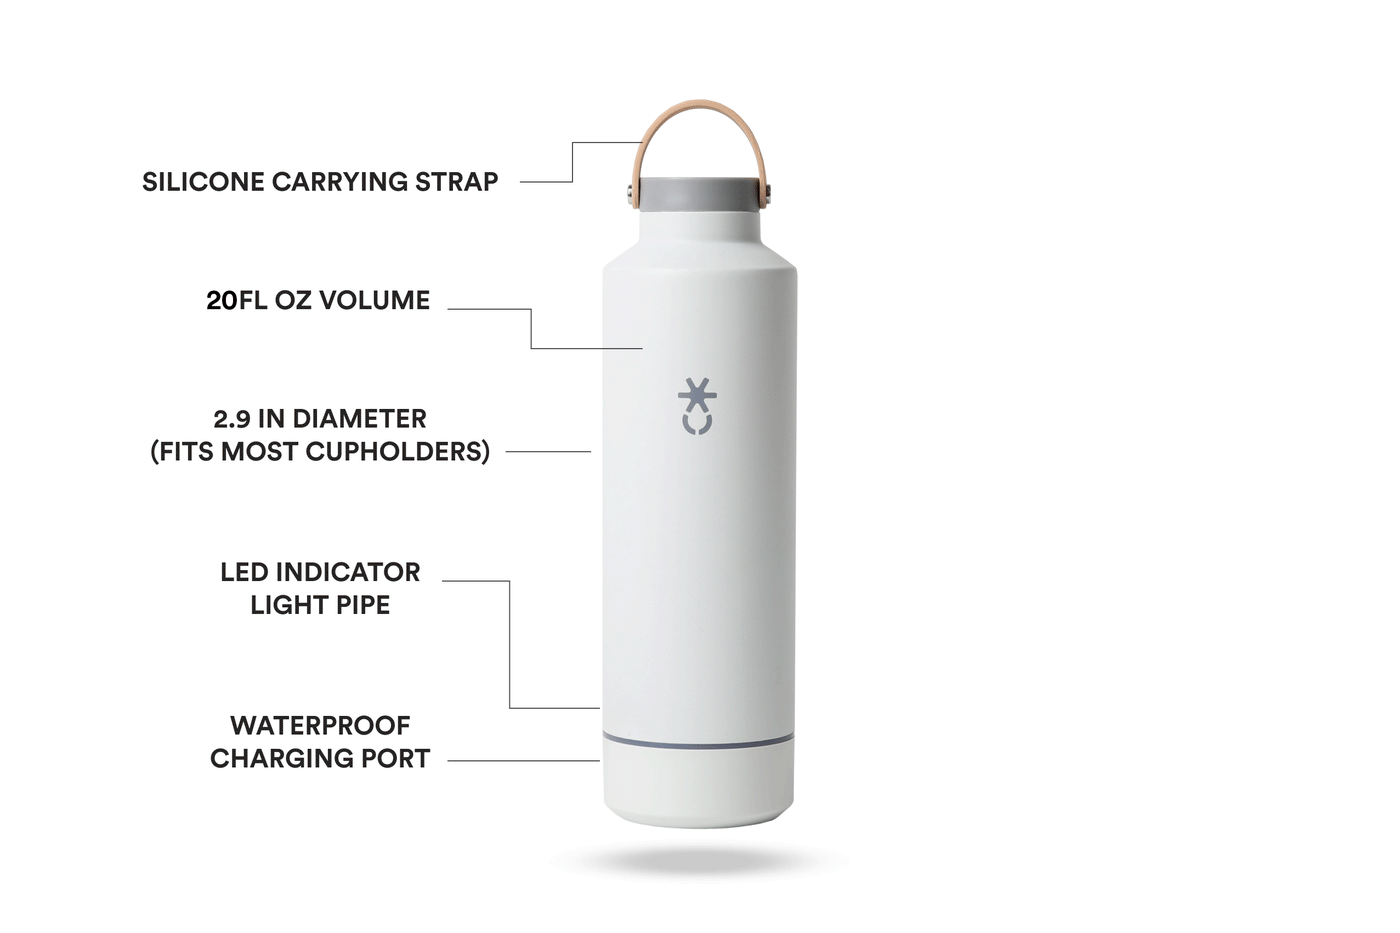 Luma Bottle: A self-cleaning water bottle with UV-C